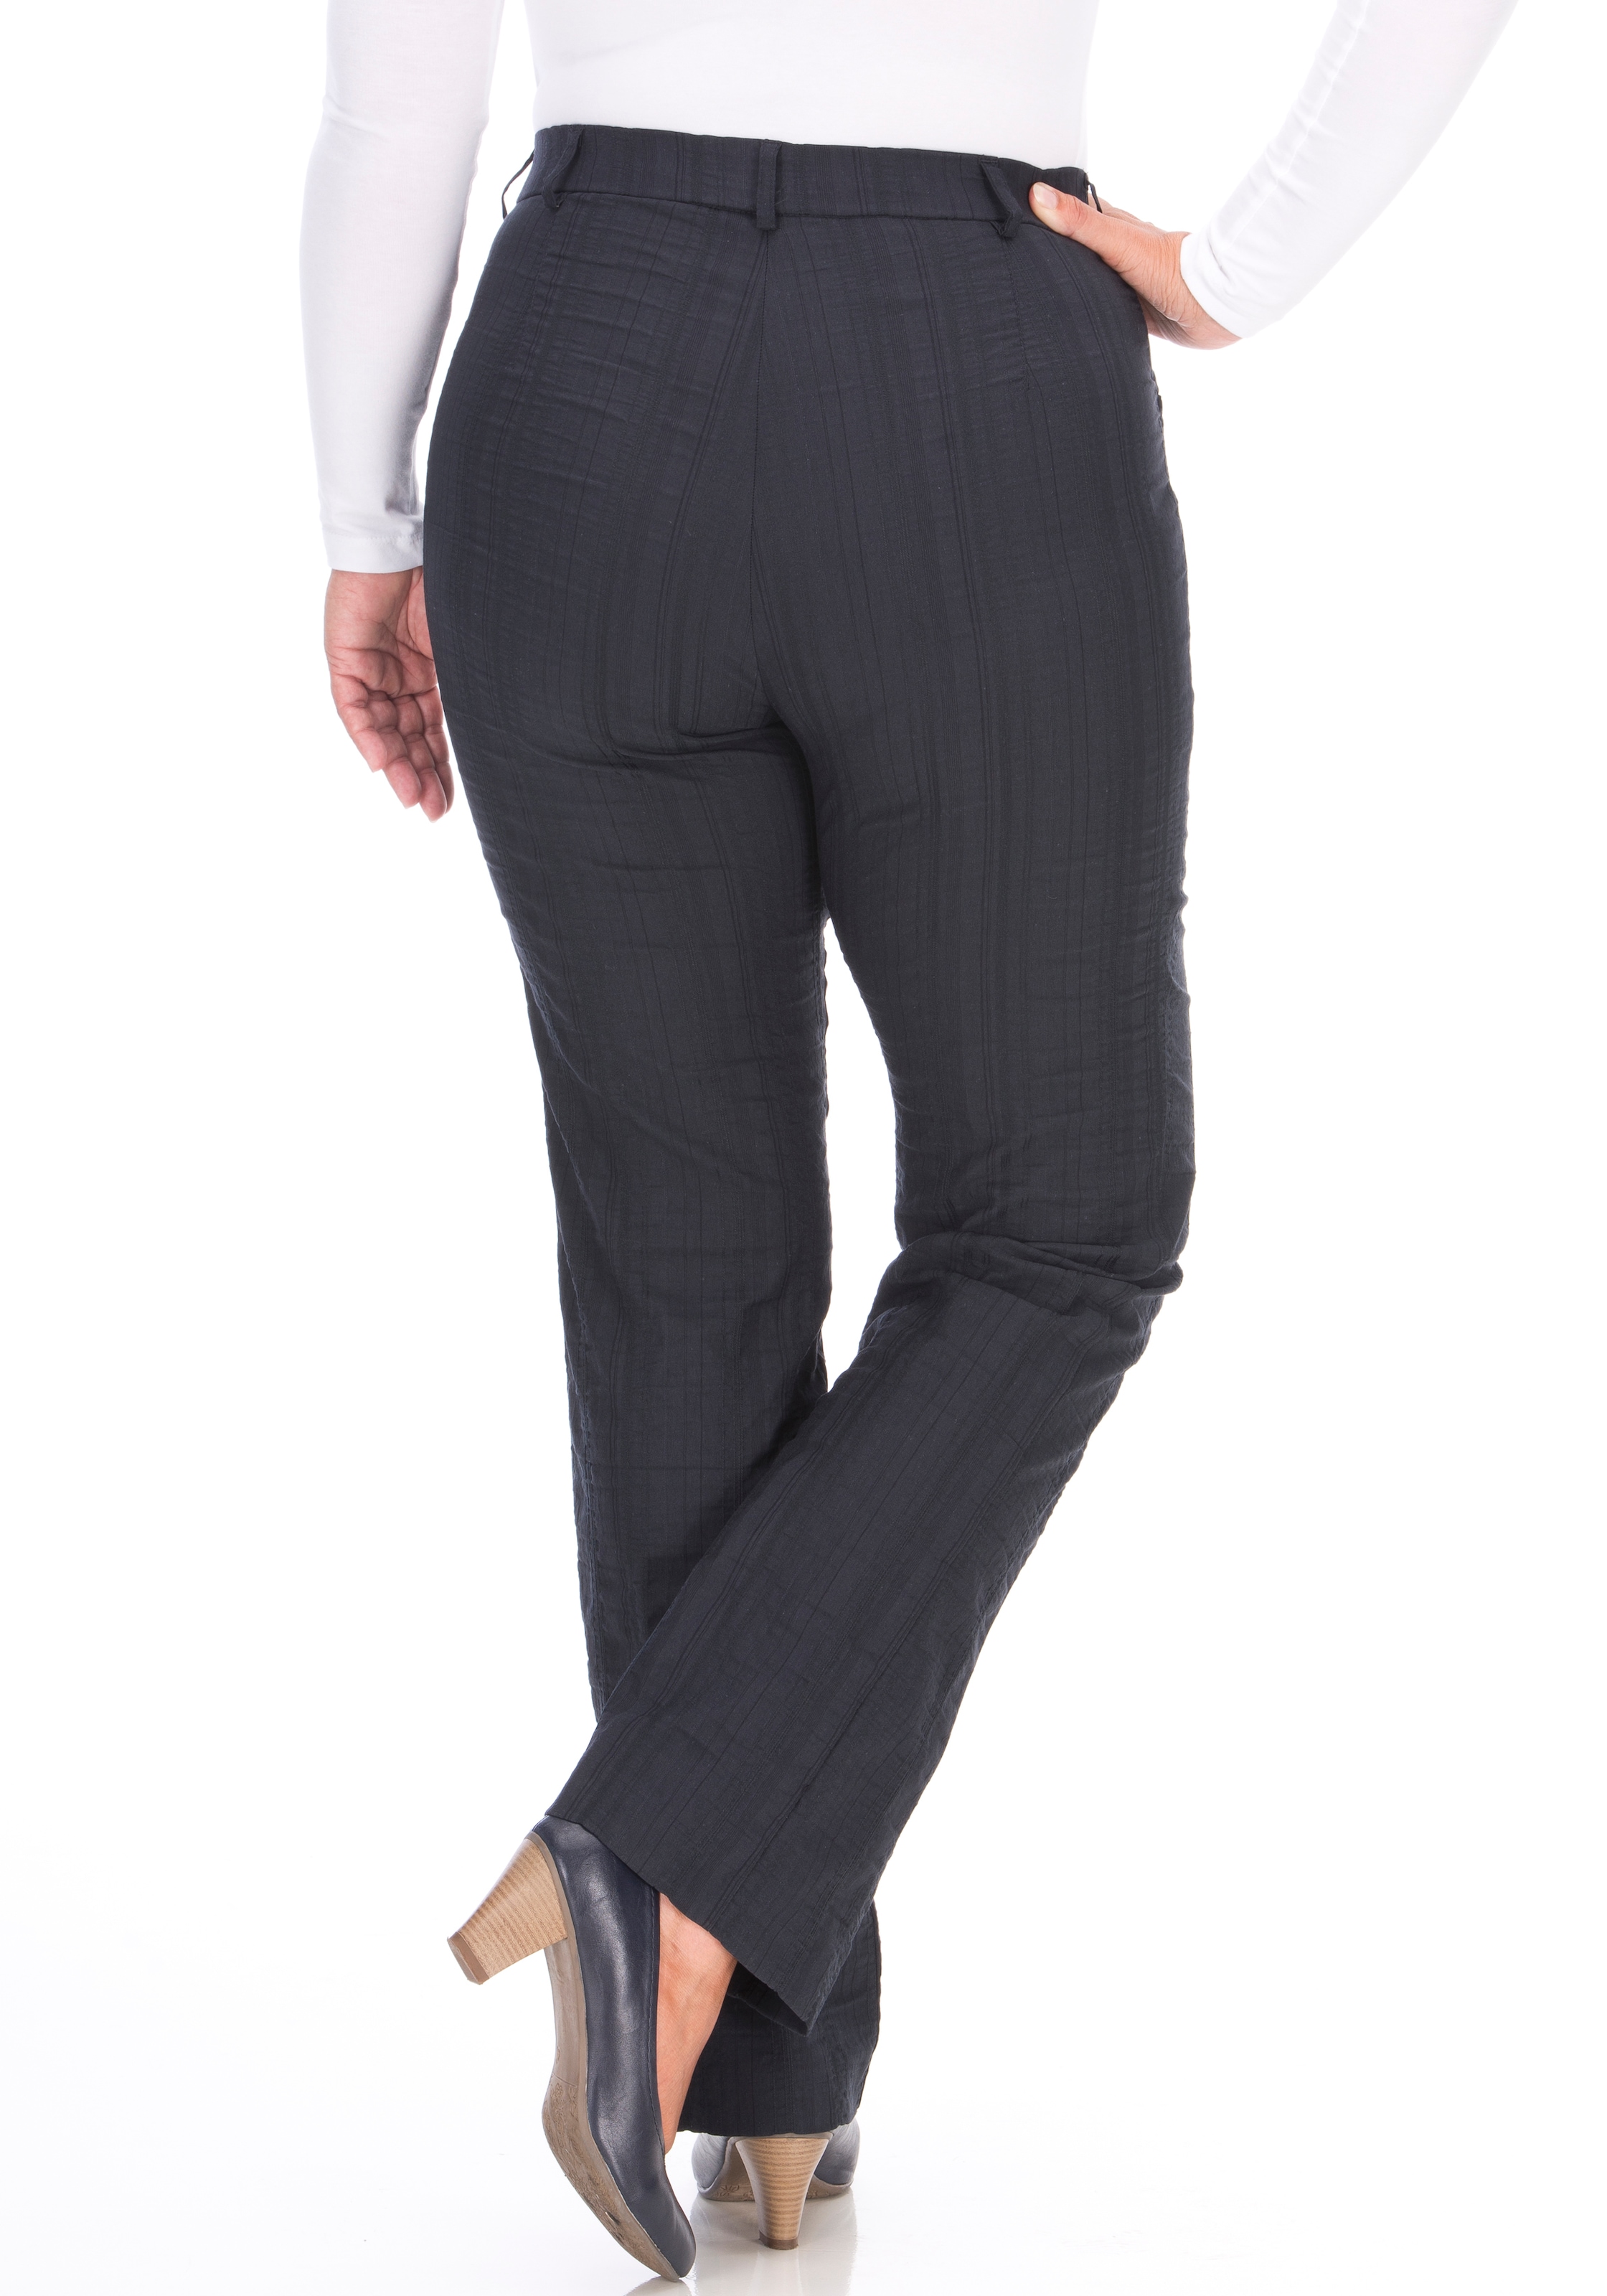 KjBRAND Stoffhose »Bea«, optimale Passform in Quer-Stretch bei ♕